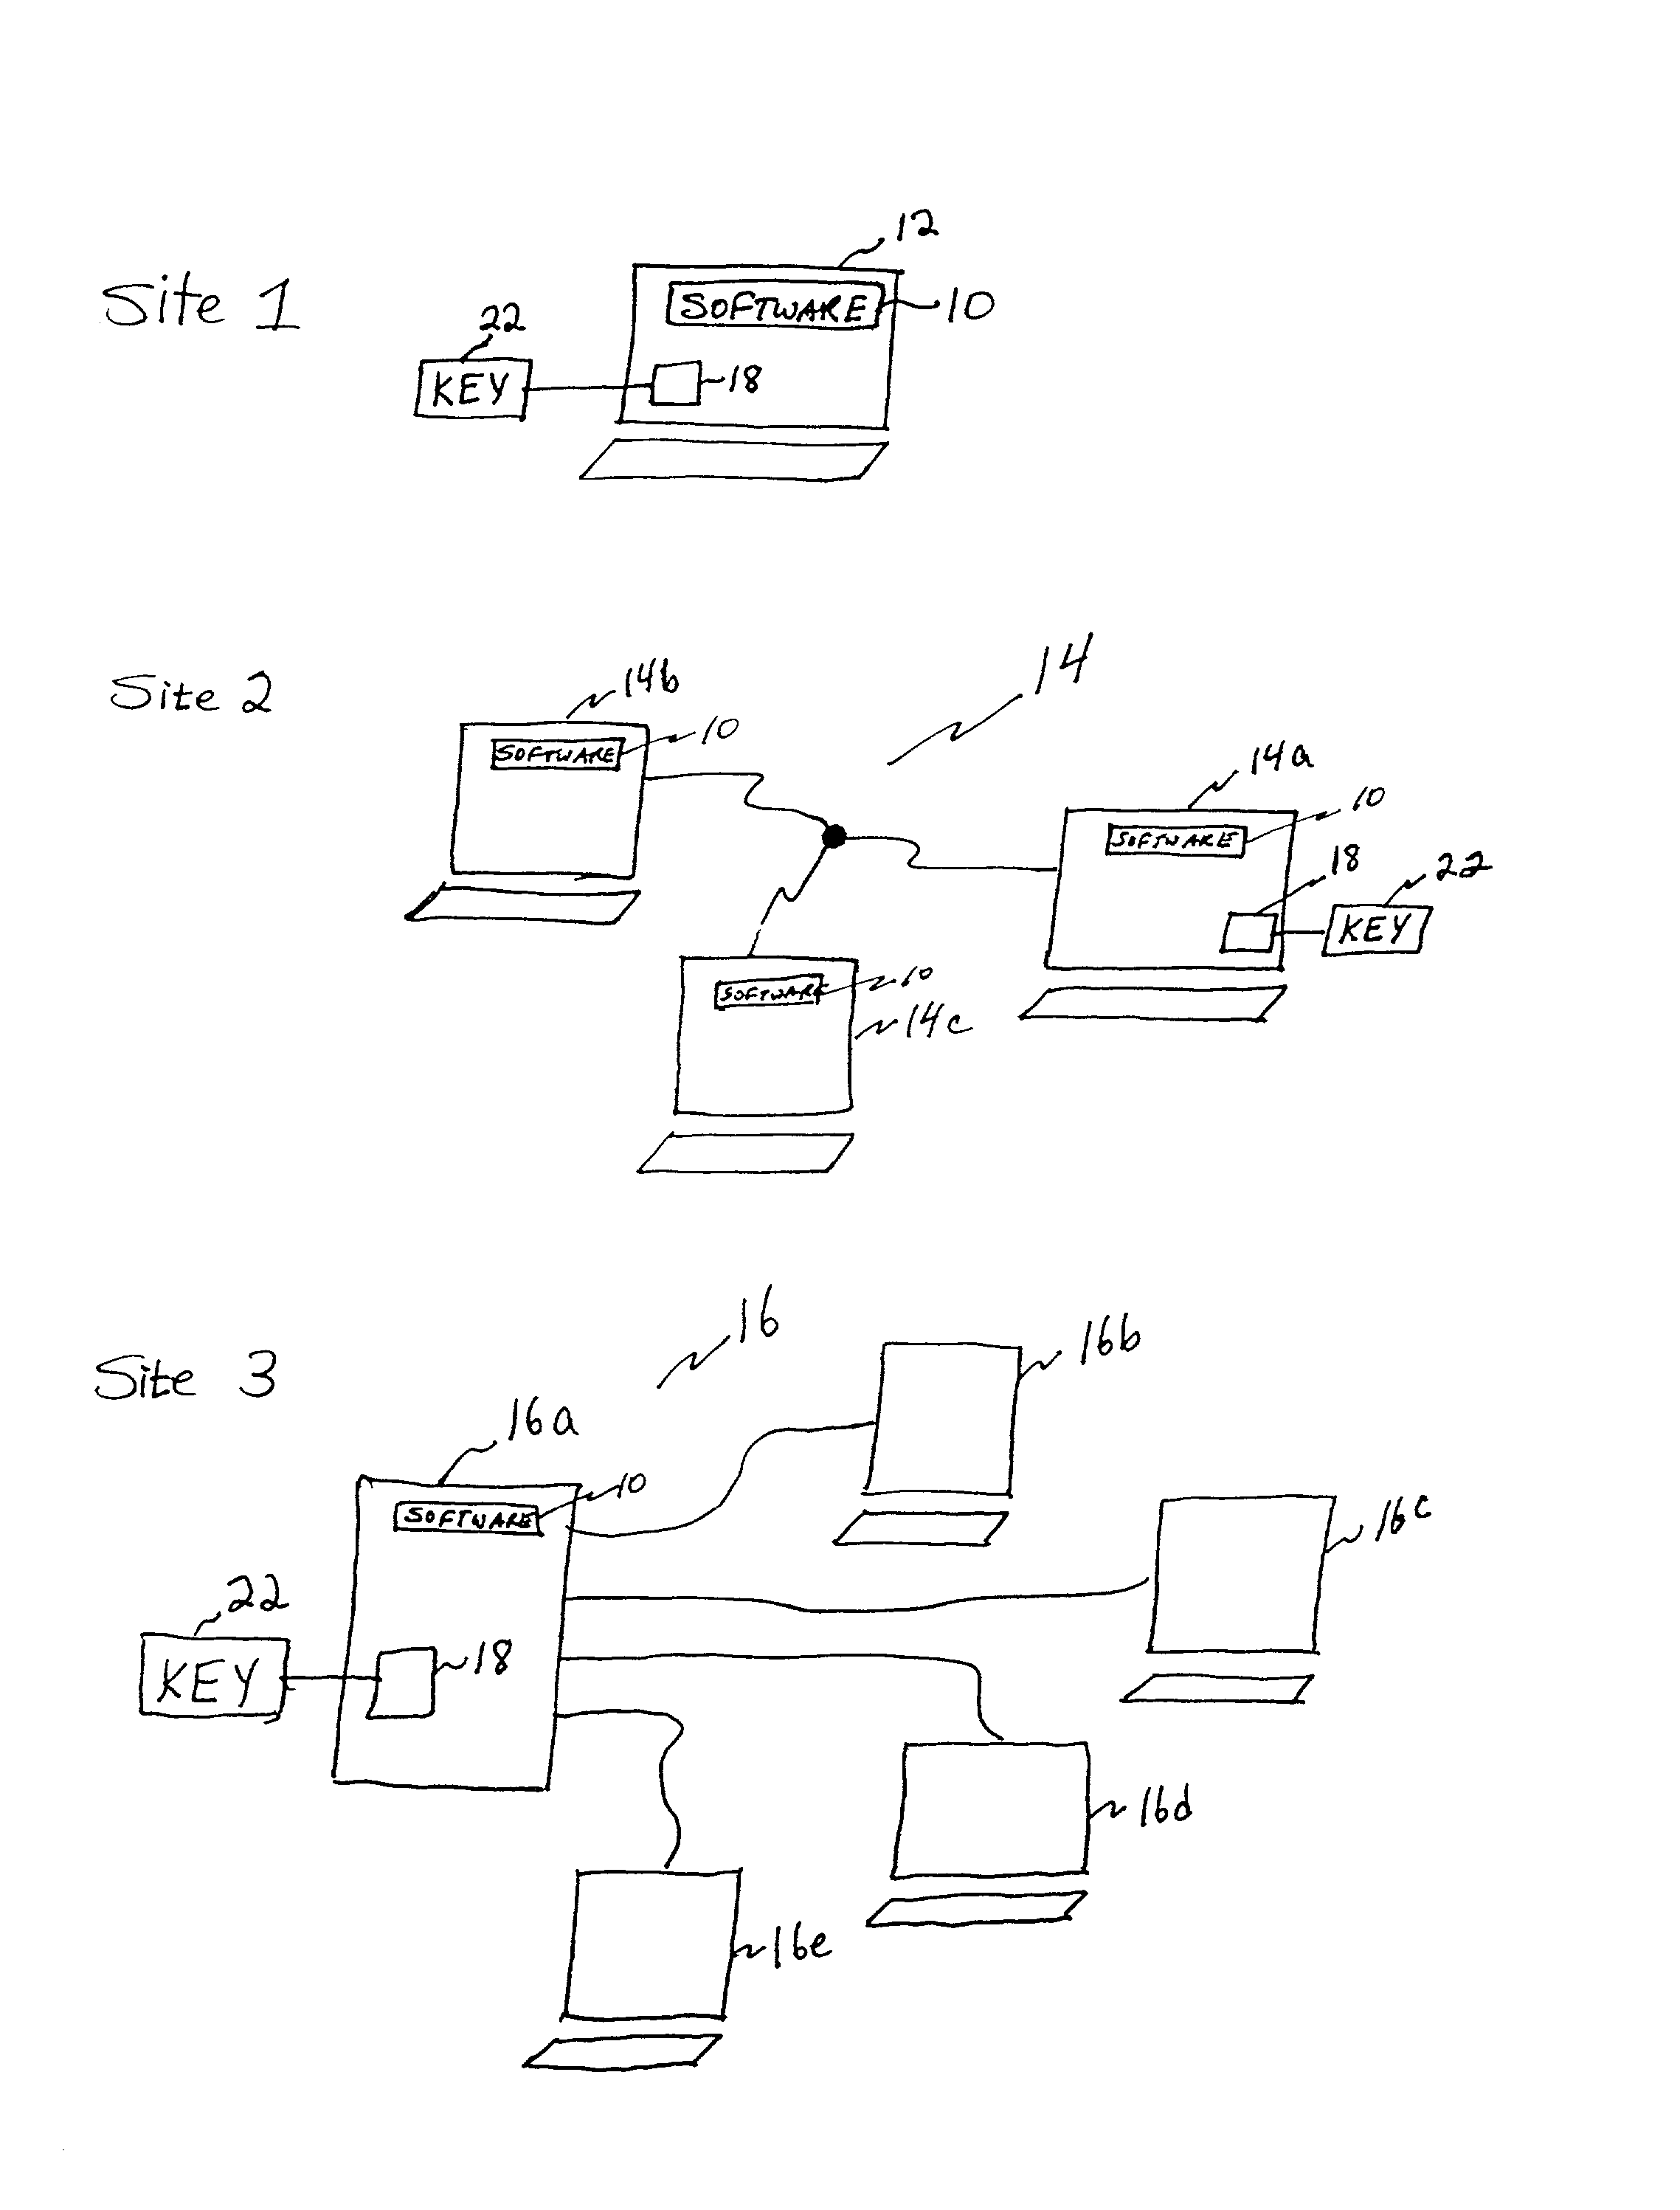 Method and system for tracking software licenses and usage